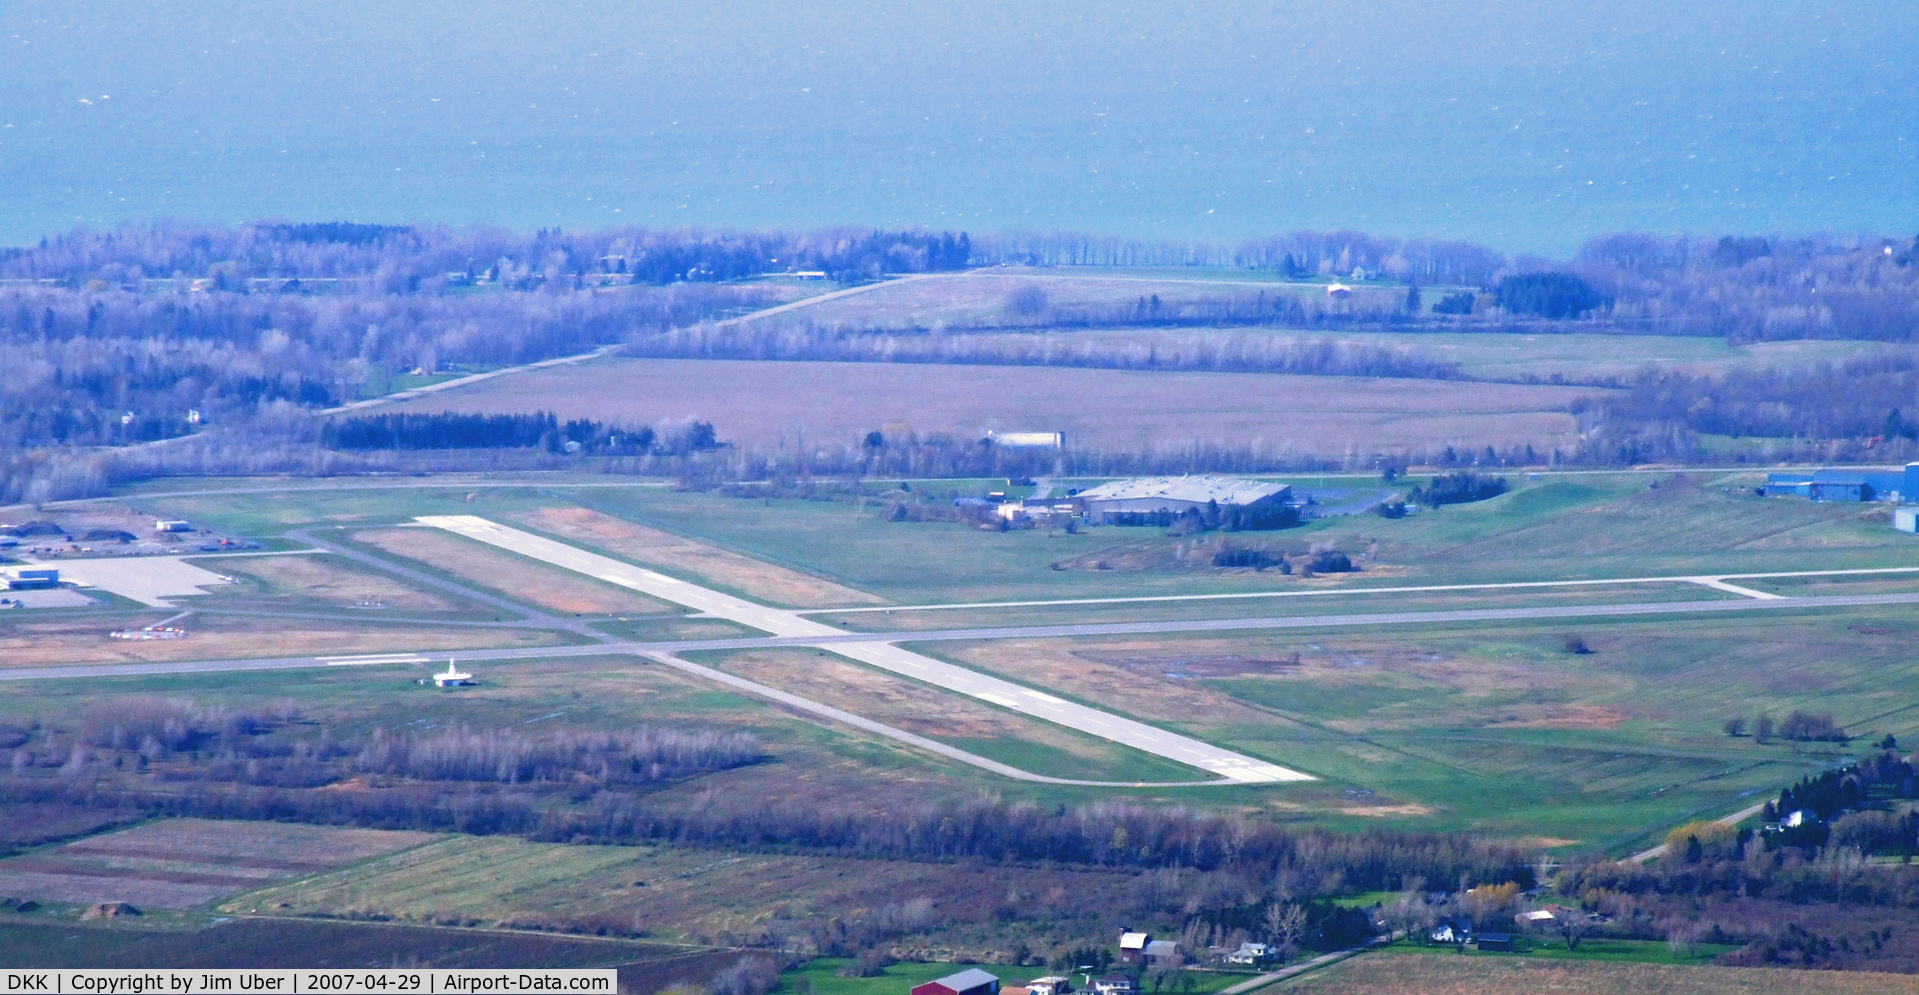 Chautauqua County/dunkirk Airport (DKK) - Lake Erie in the background